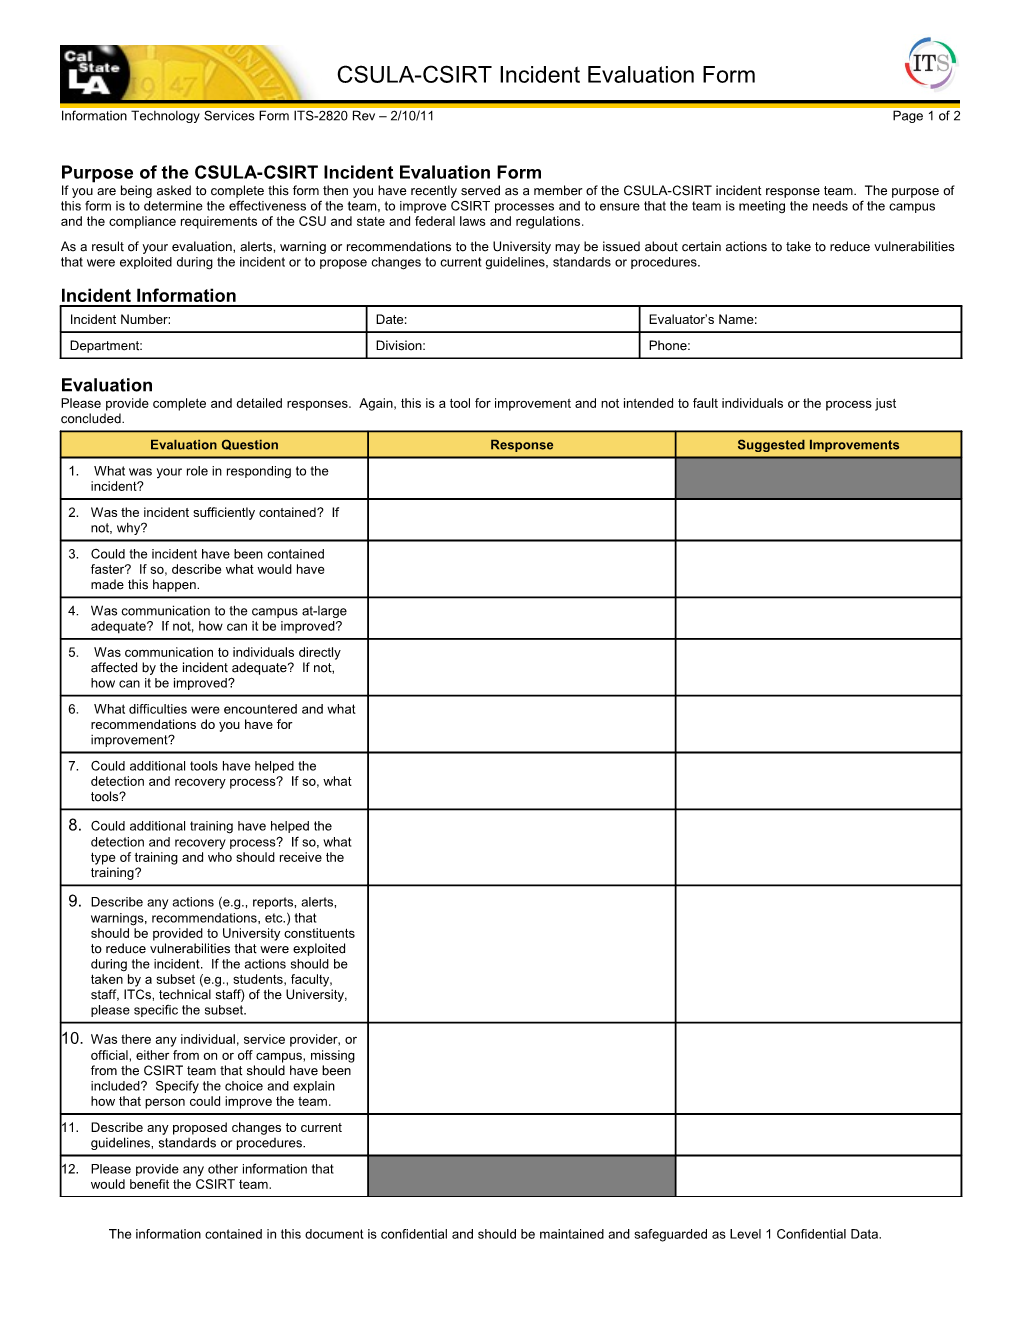 Purpose of the CSULA-CSIRT Incident Evaluation Form